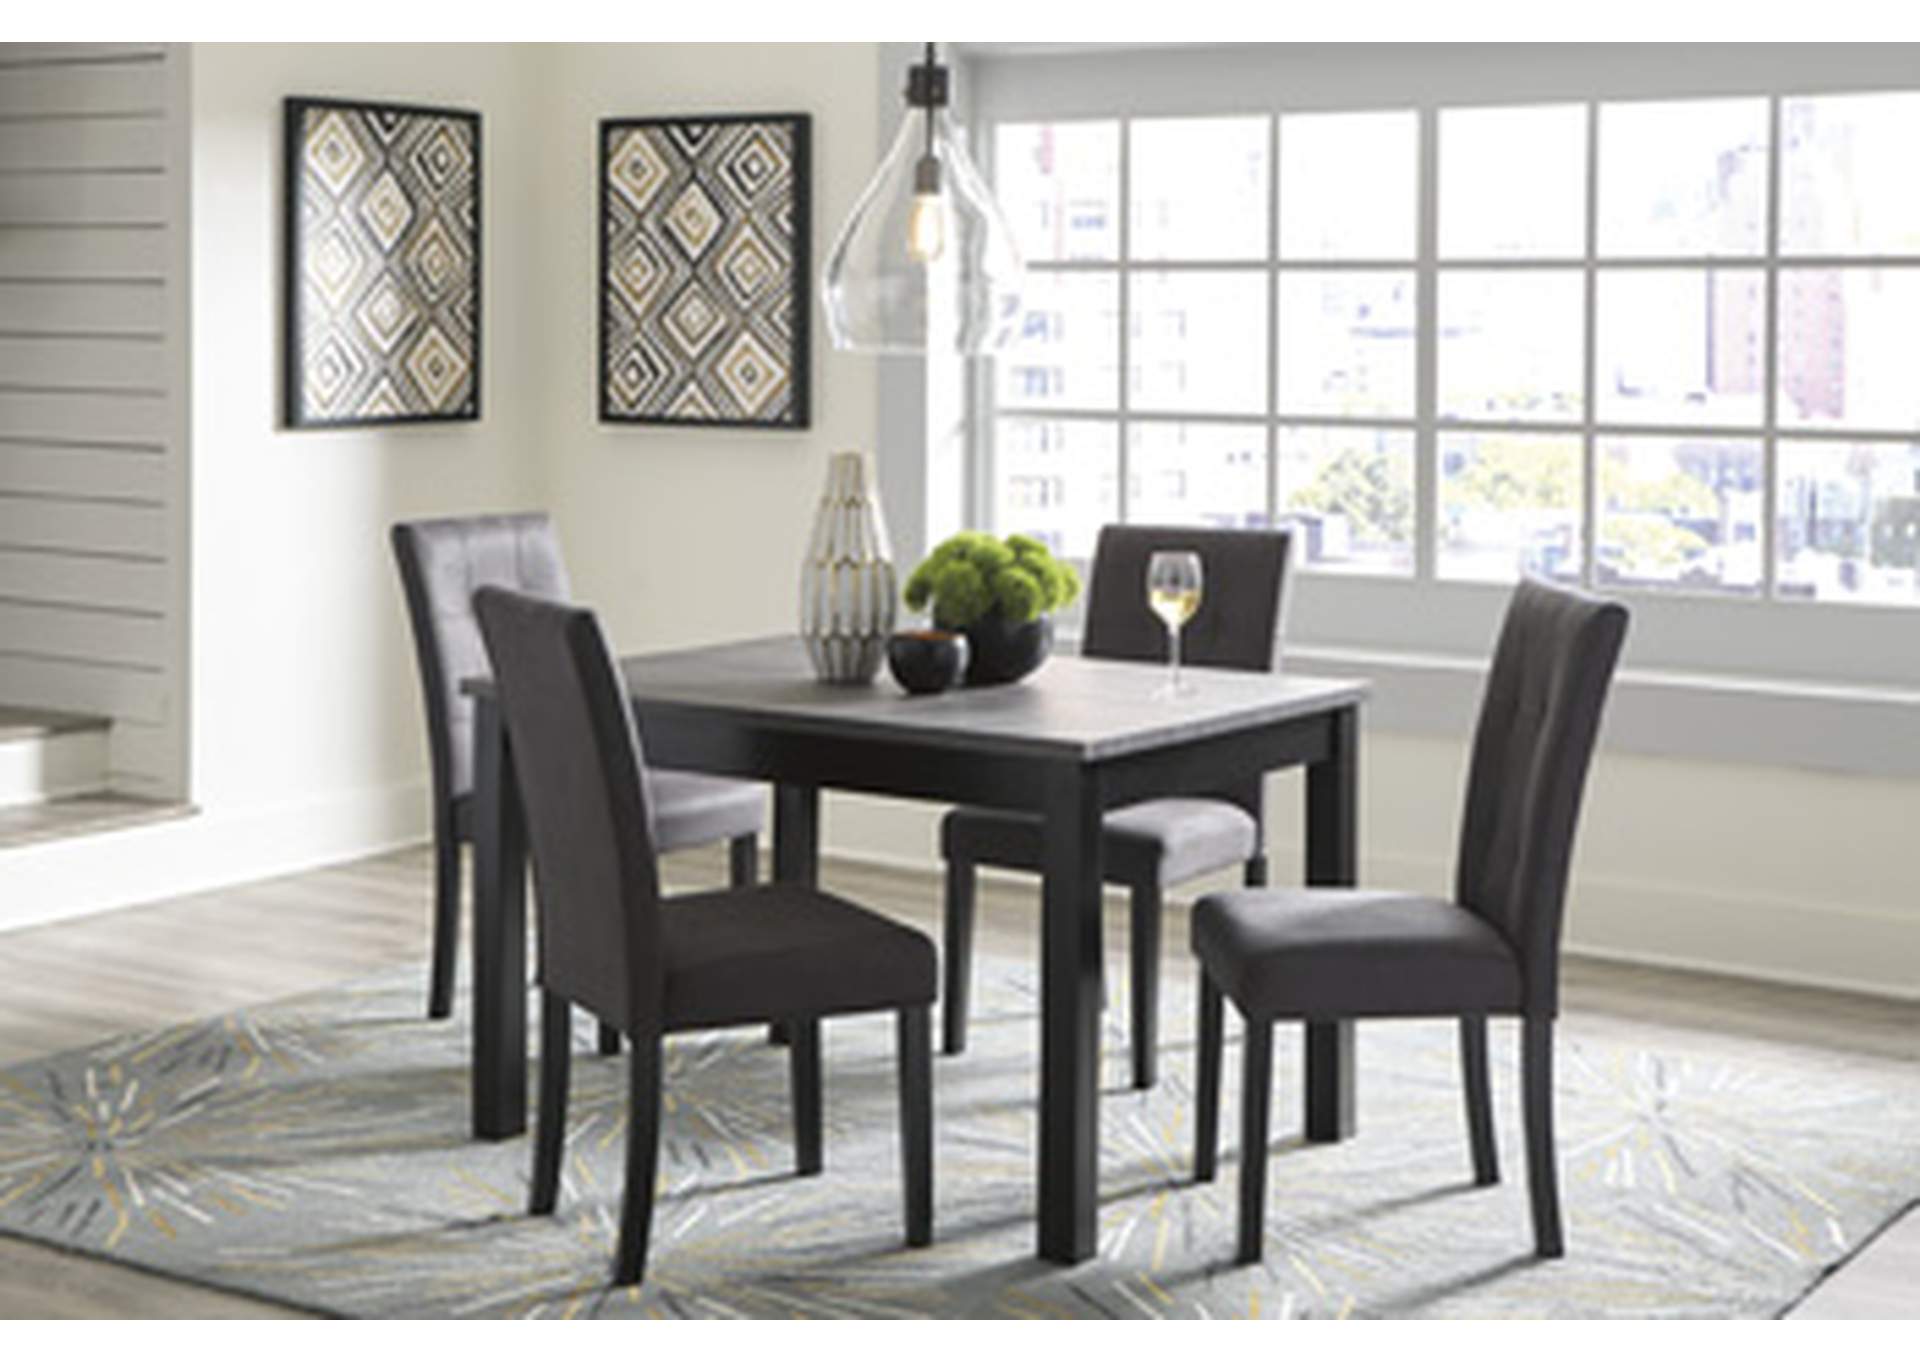 Garvine Dining Room Table And Chairs, Ashley Furniture Glass Dining Room Sets